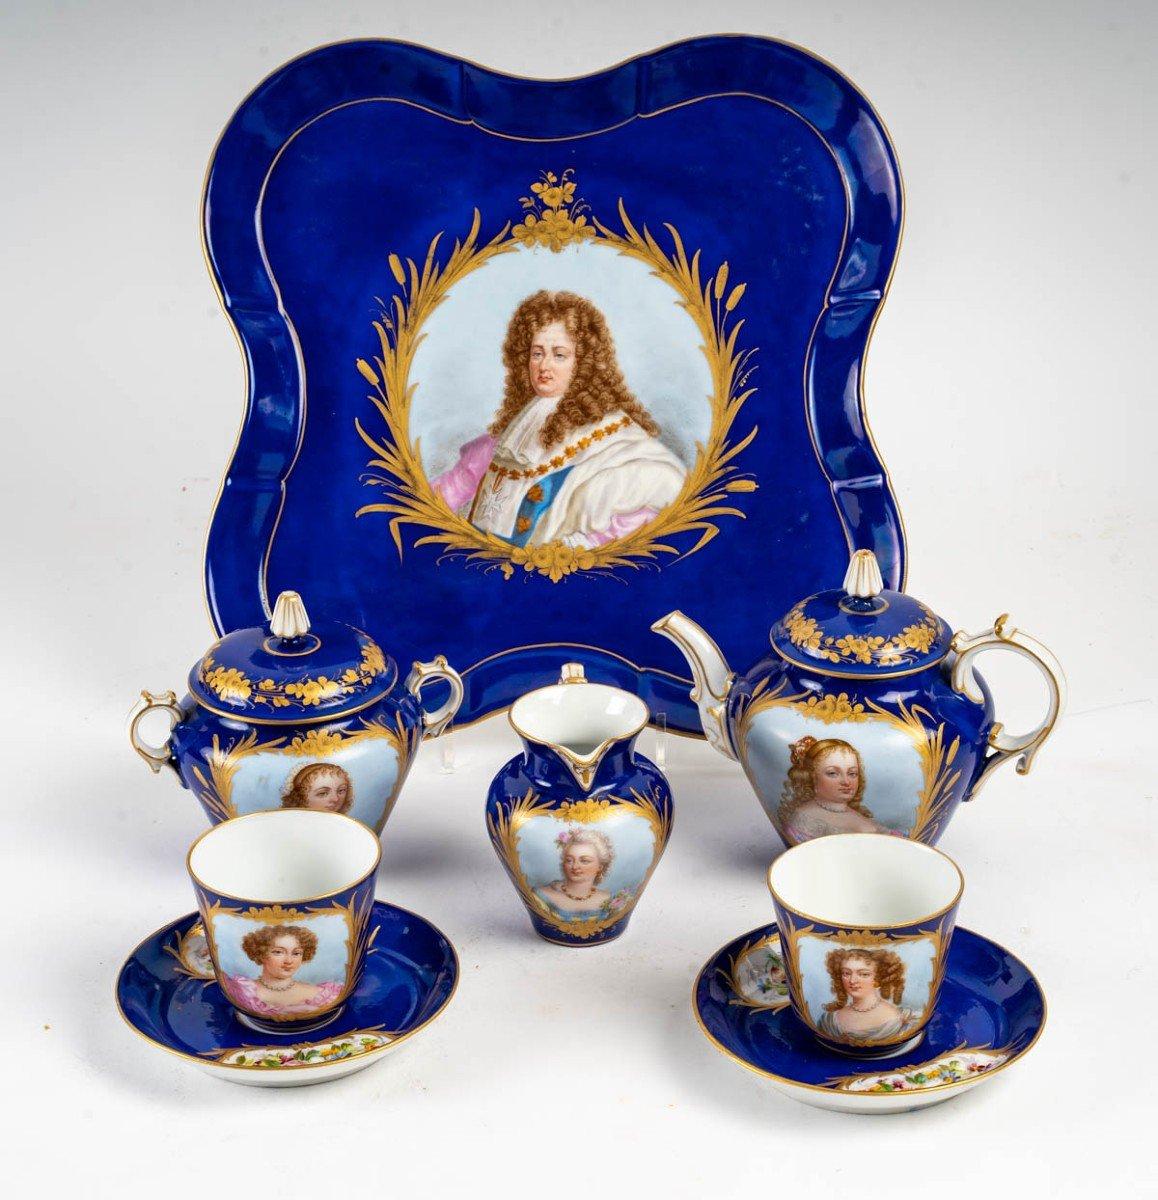 Napoleon III Tea and Coffee Service in Blue Porcelain Signed Sèvres XIXth Century